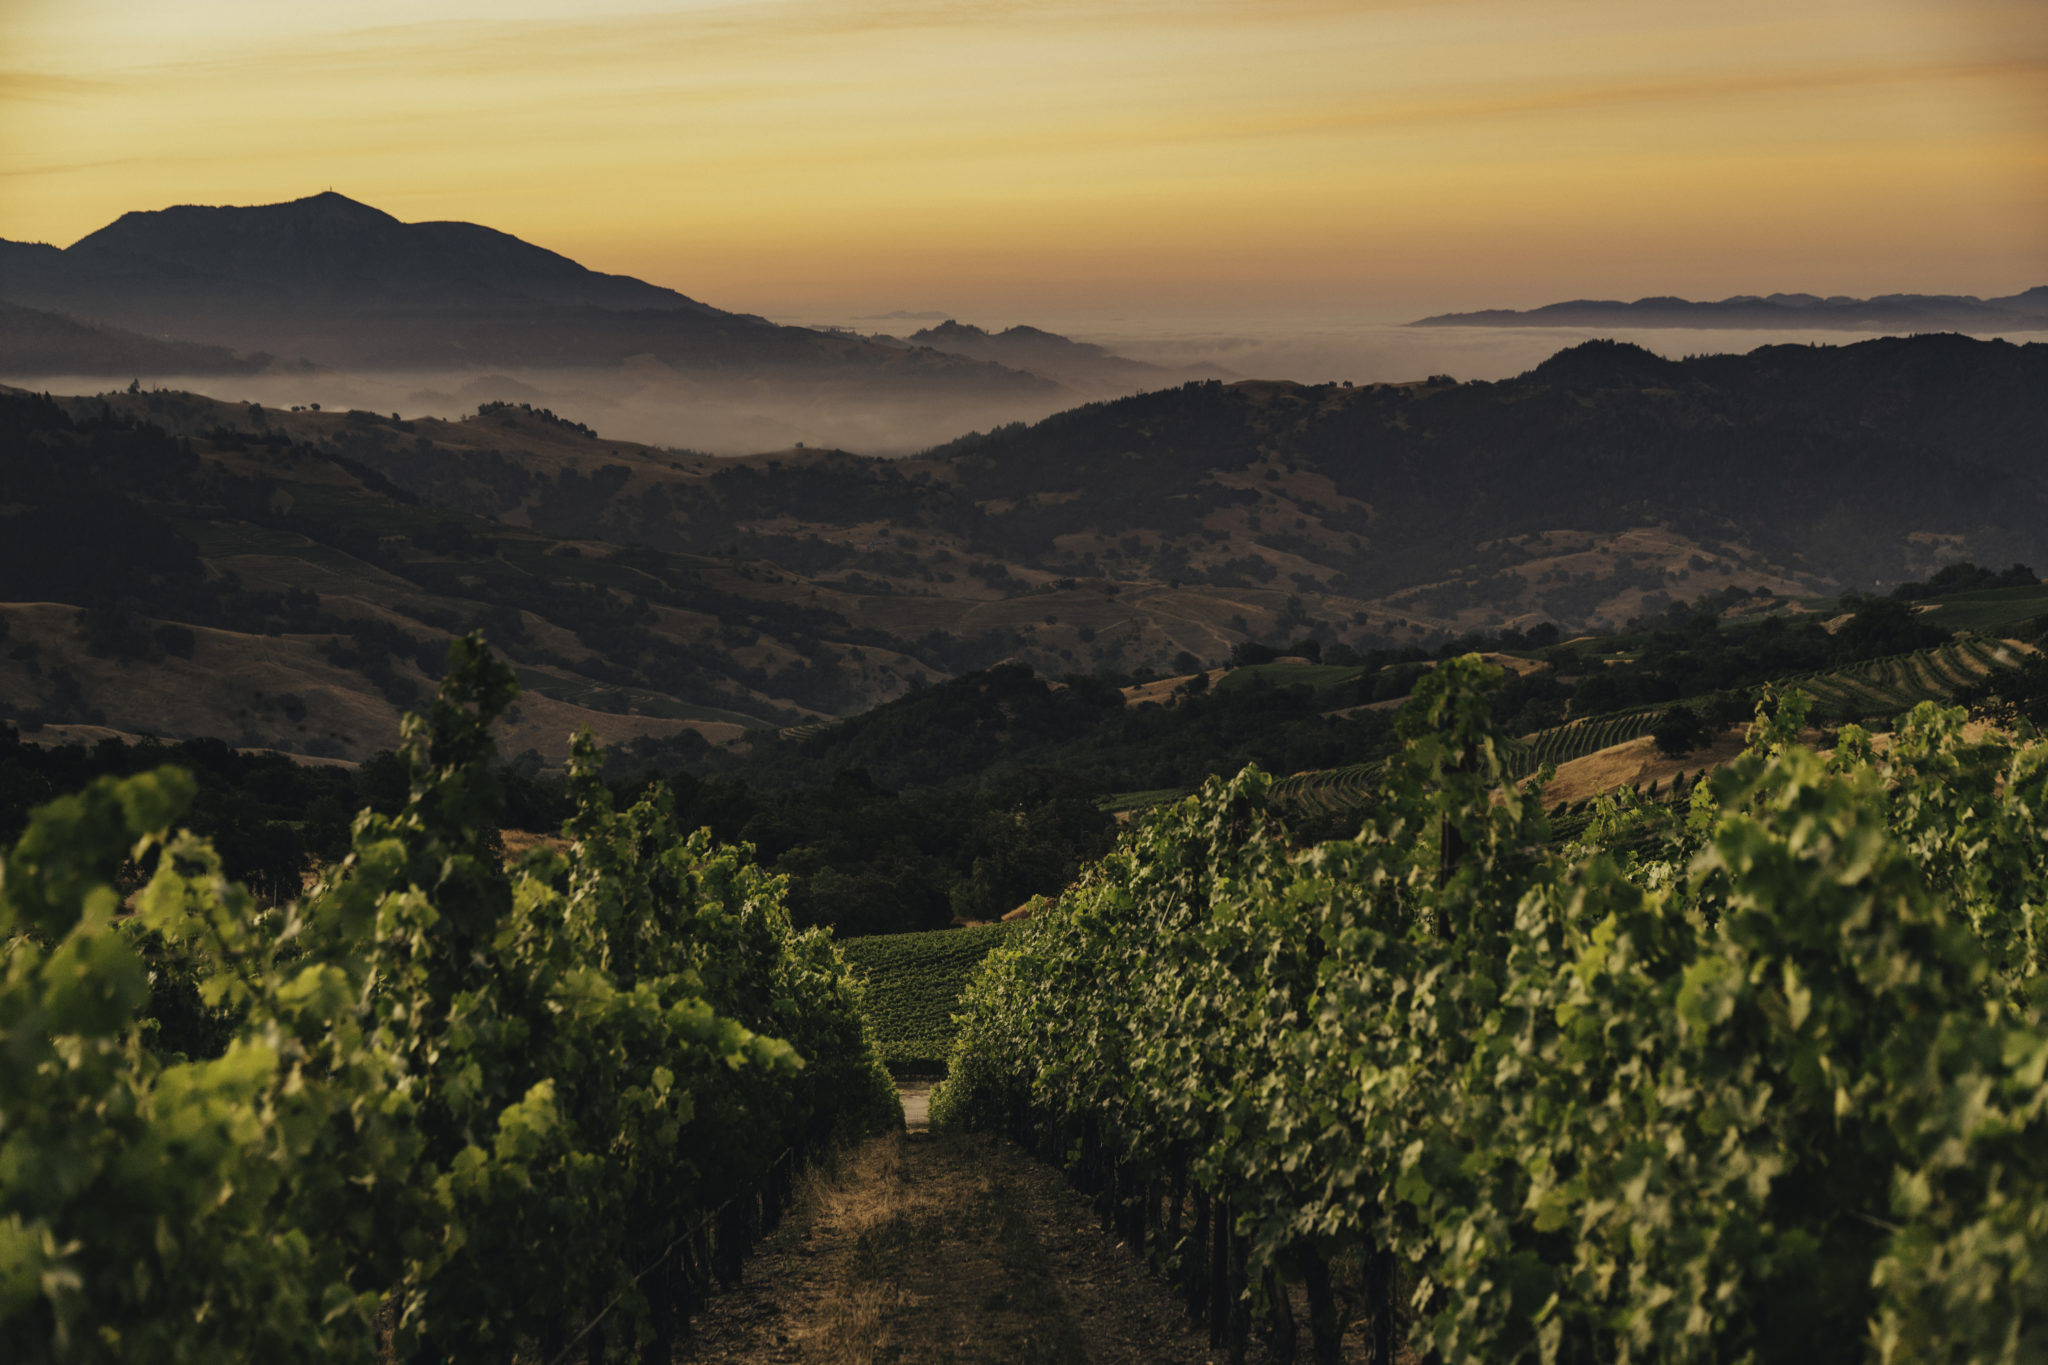 Vineyard rows with mountains in background at dusk.